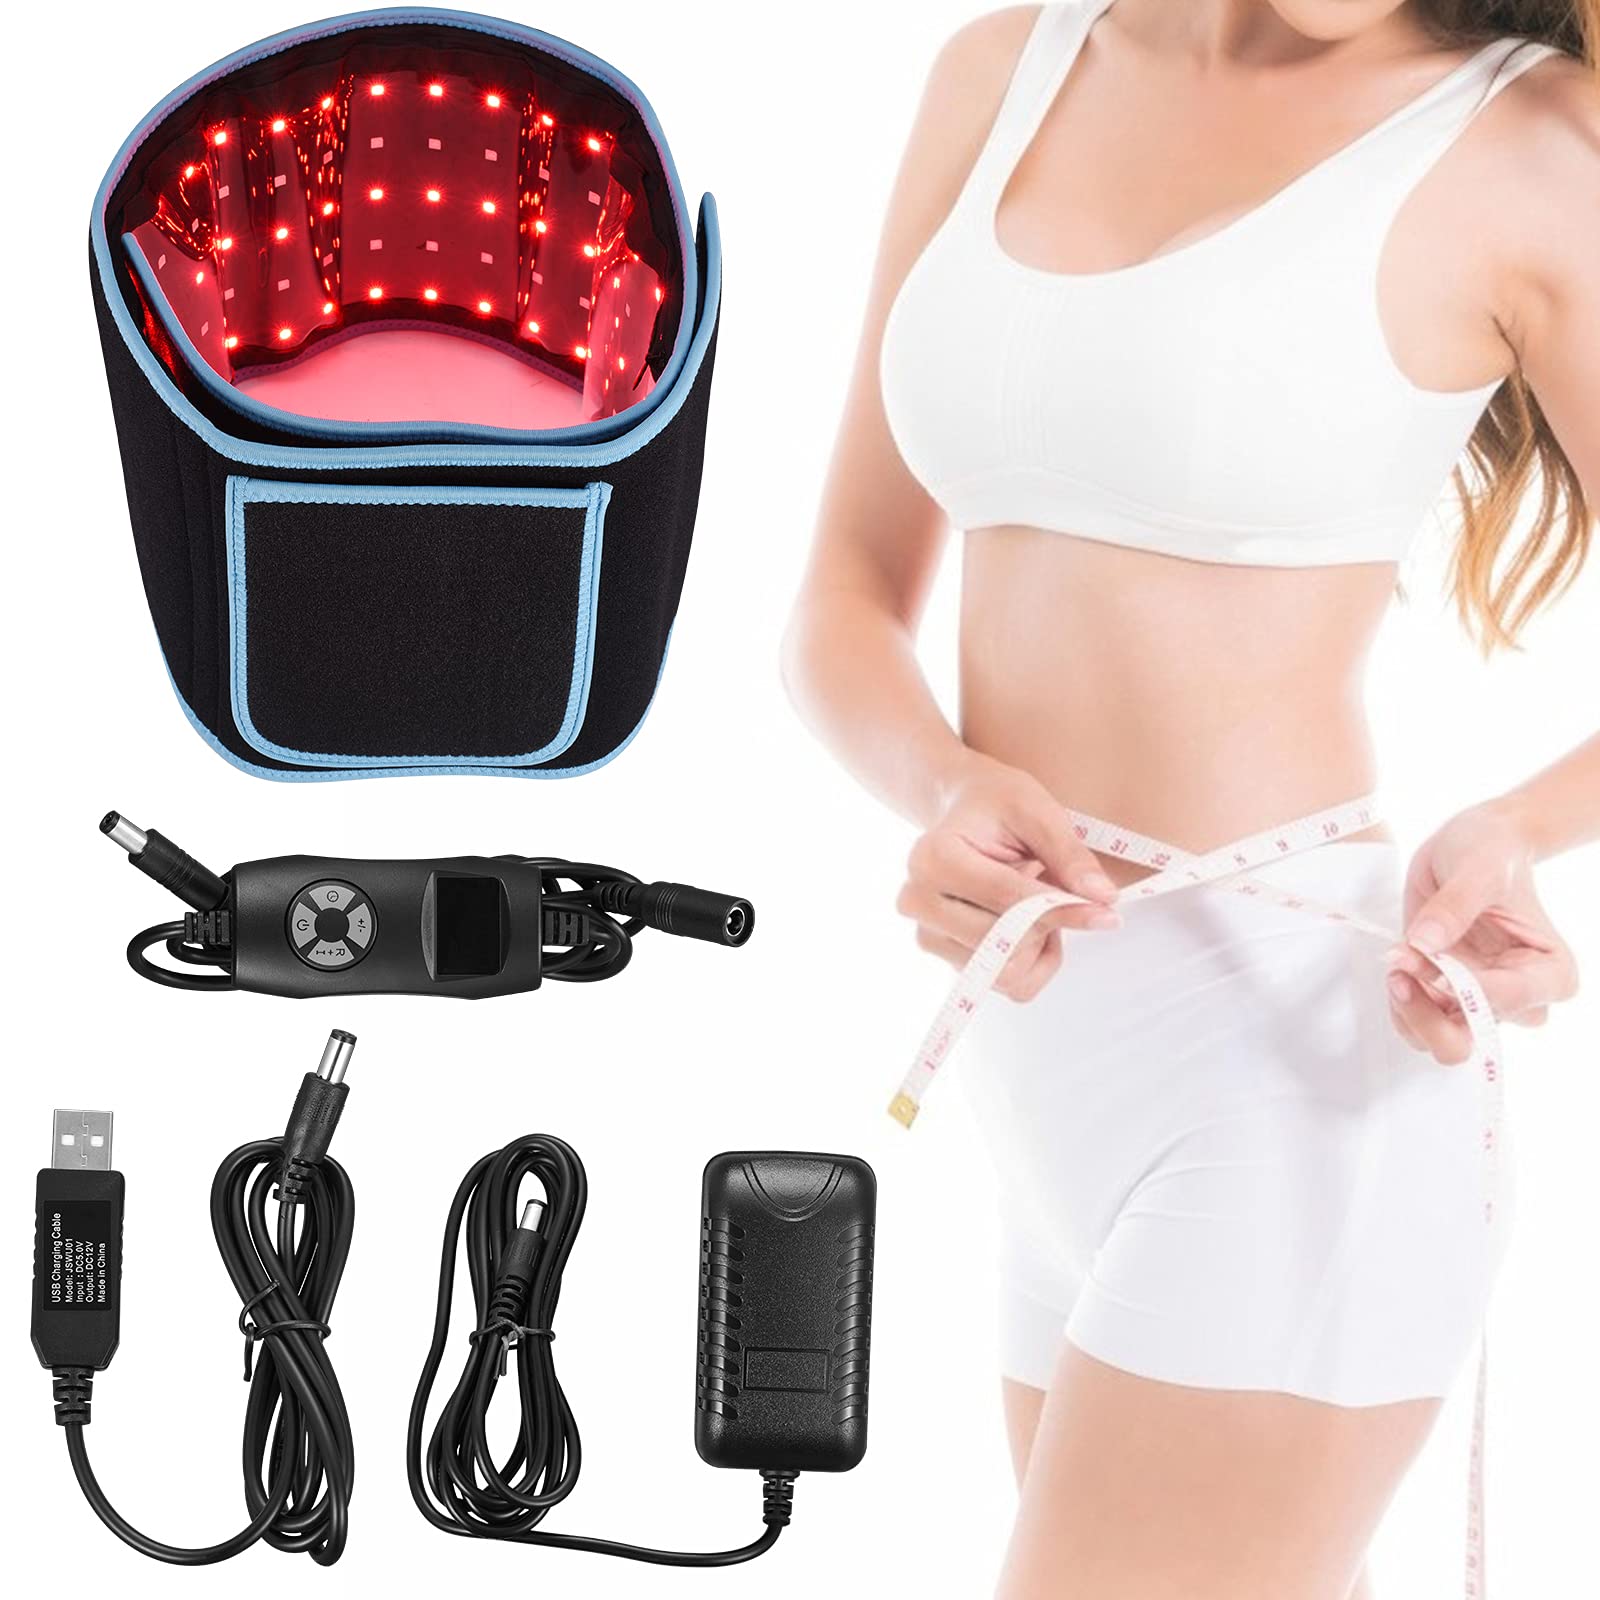 TTLIFE Infrared Light Therapy Belt for Pain Relief, 20W Homeuse Wearable Wrap Deep Therapy Pad Back Shoulder Joints Muscle Pain Relief, Massager Eq...